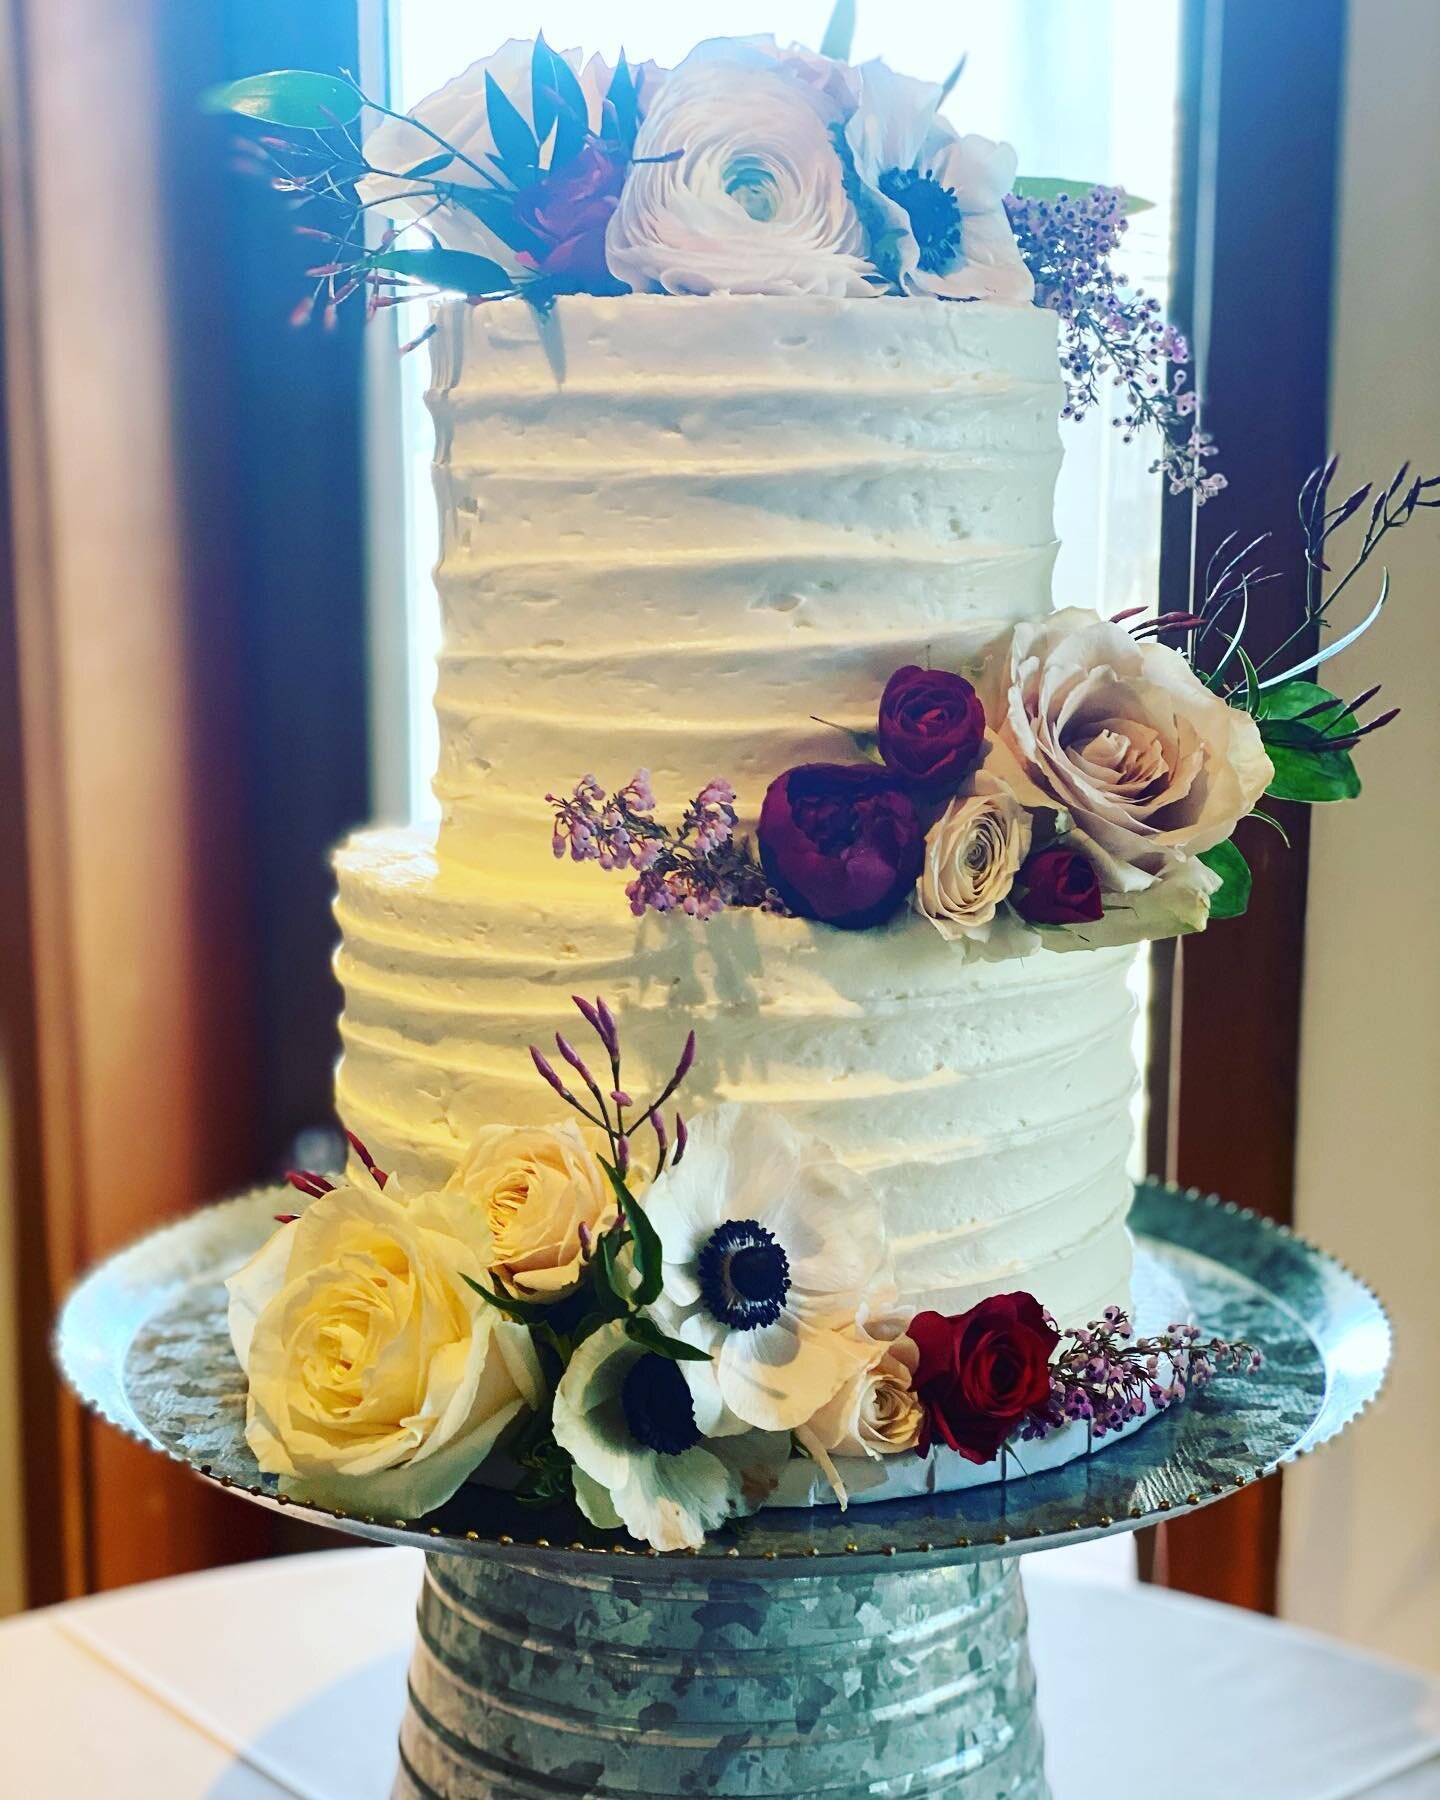 Speaking of cakes! We did an amazing wedding cake yesterday (sorry for the self back pat but I love this one!). It was a special request by the bride for a carrots cake with lots of yummy icing! As usual the flowers from @floranfauna2 made our job ev